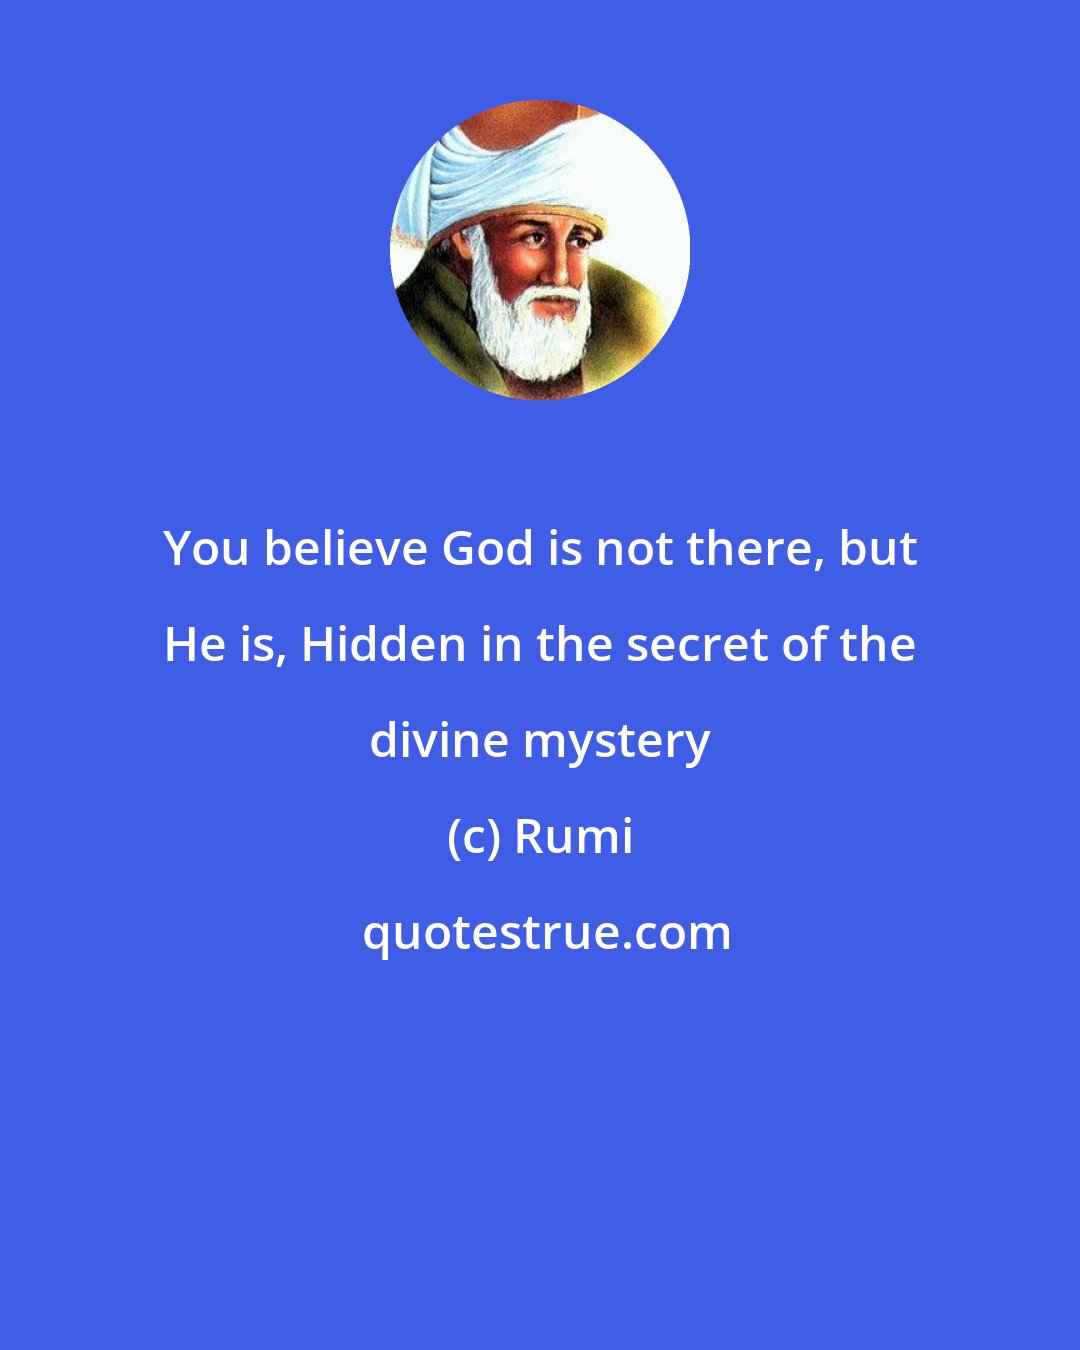 Rumi: You believe God is not there, but He is, Hidden in the secret of the divine mystery